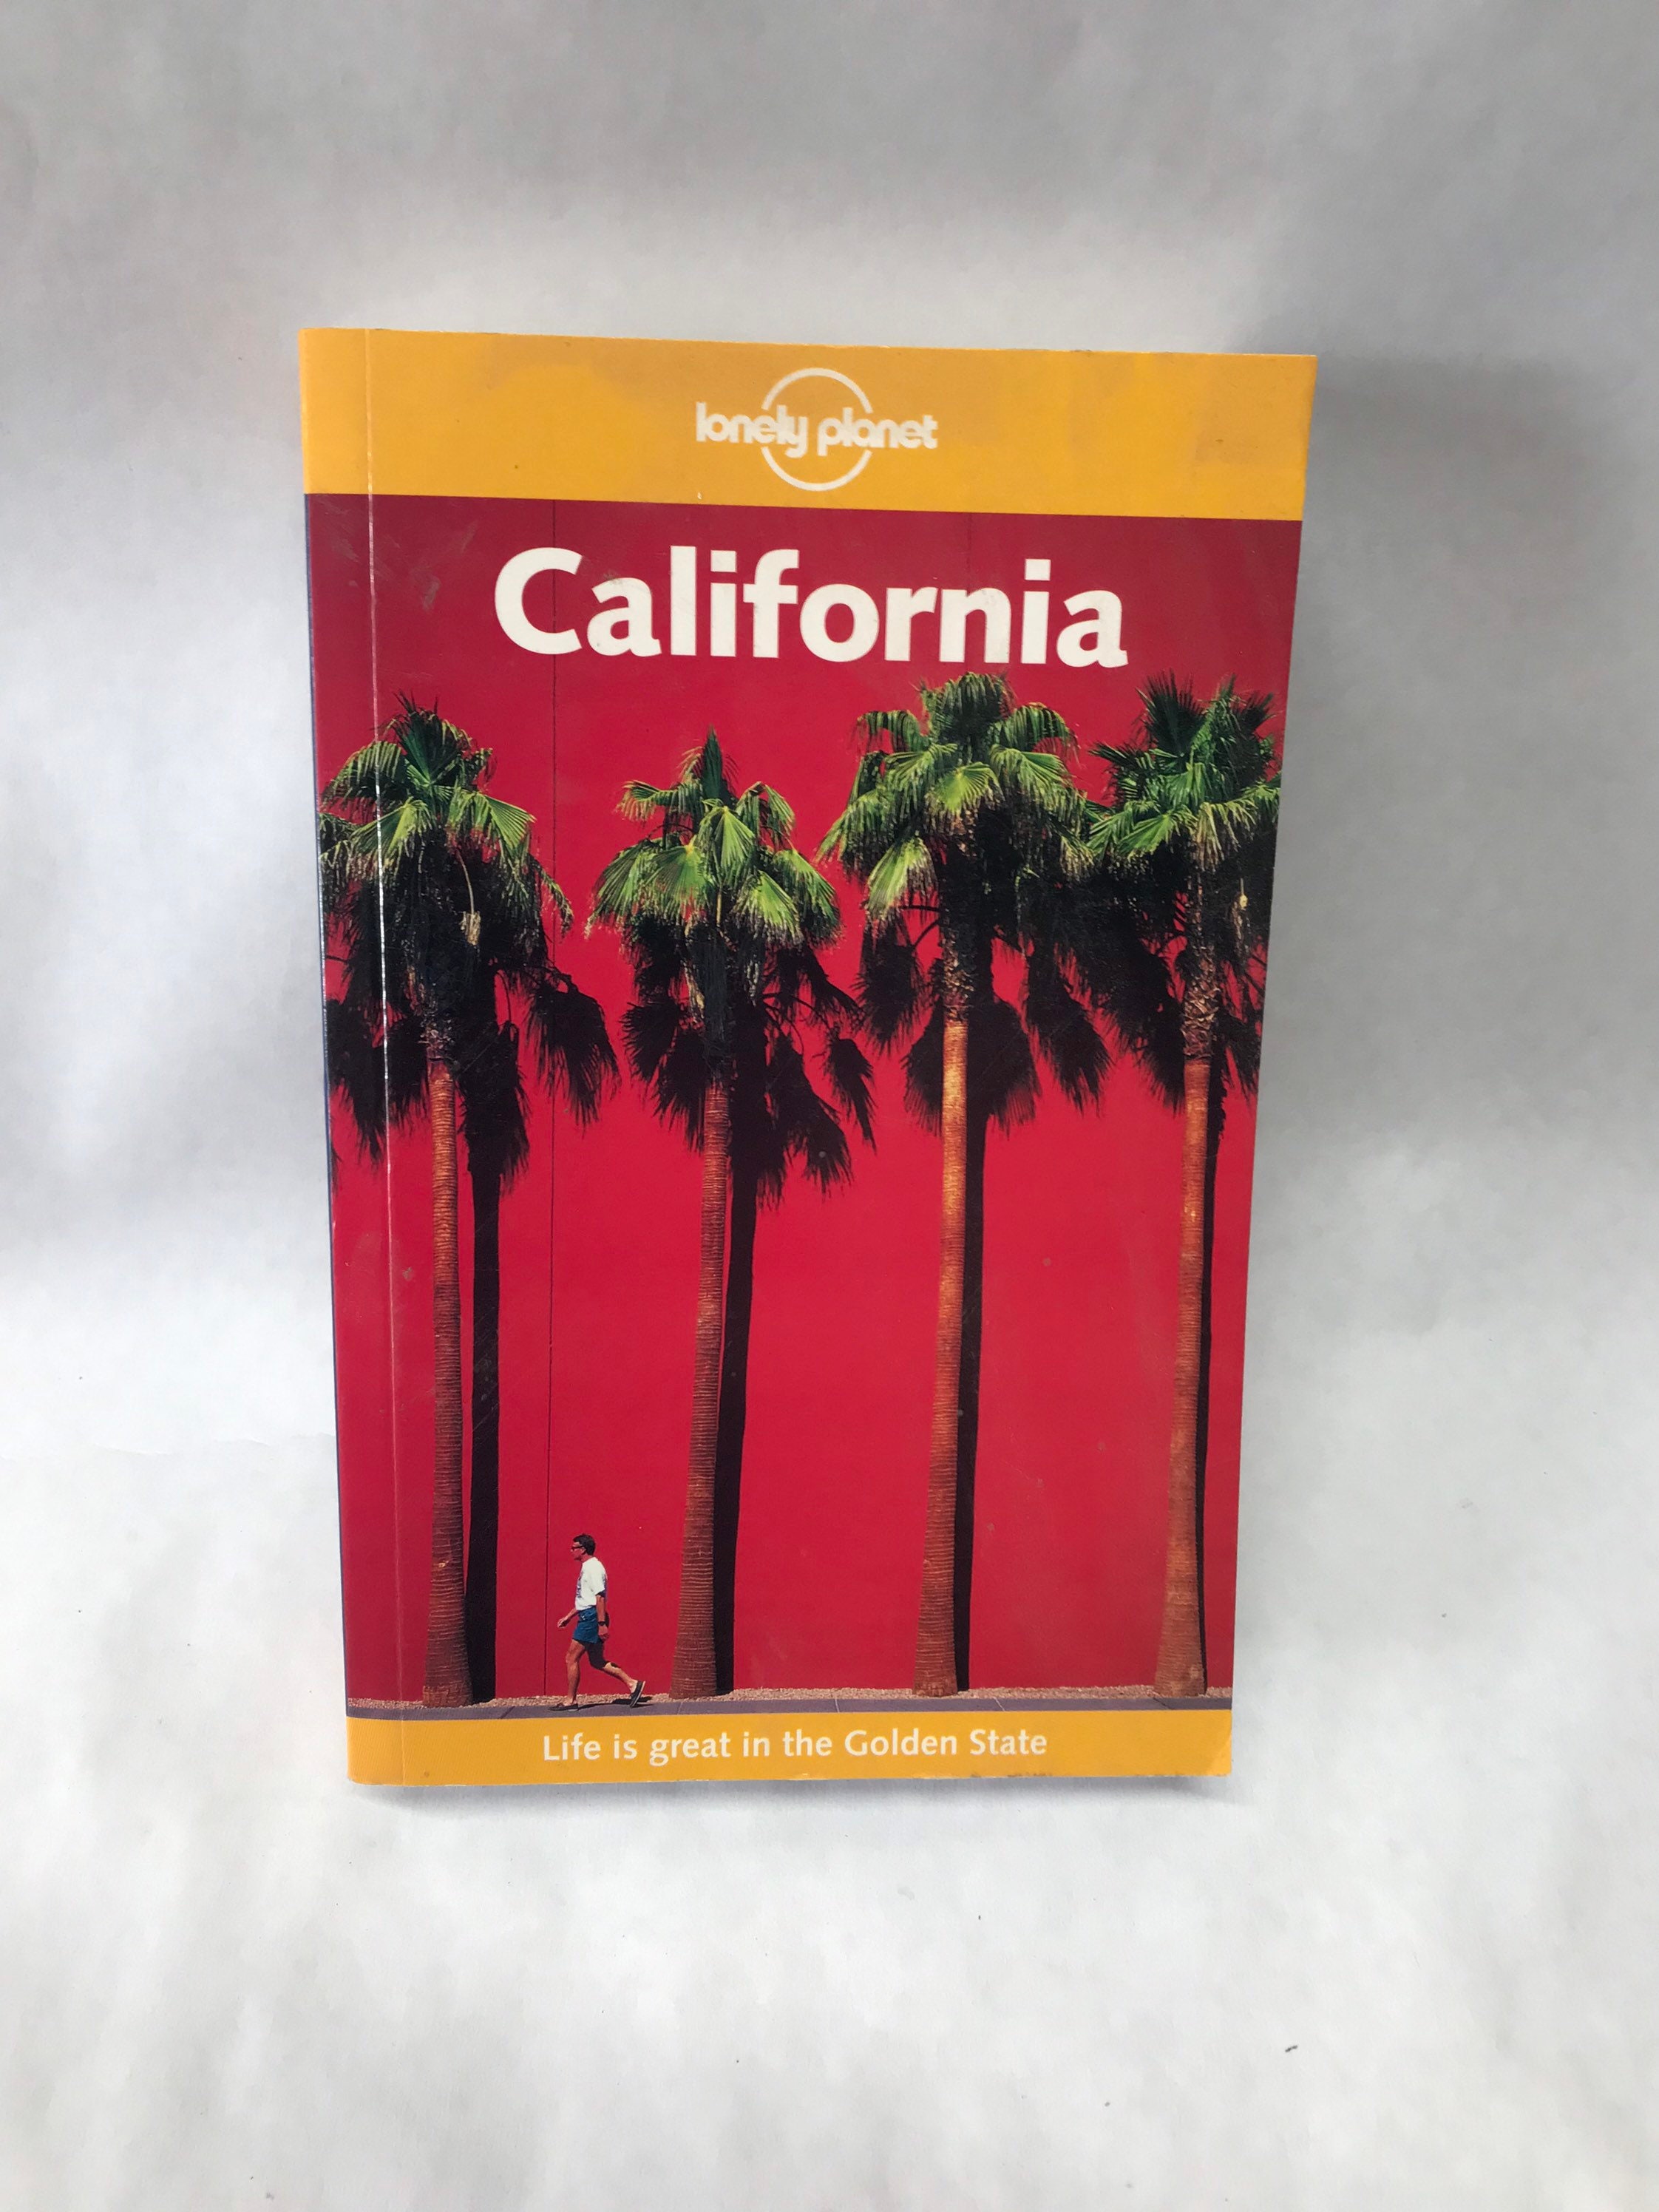 Travel Guide Book California the Golden State Lonely Planet 736 Pages. 